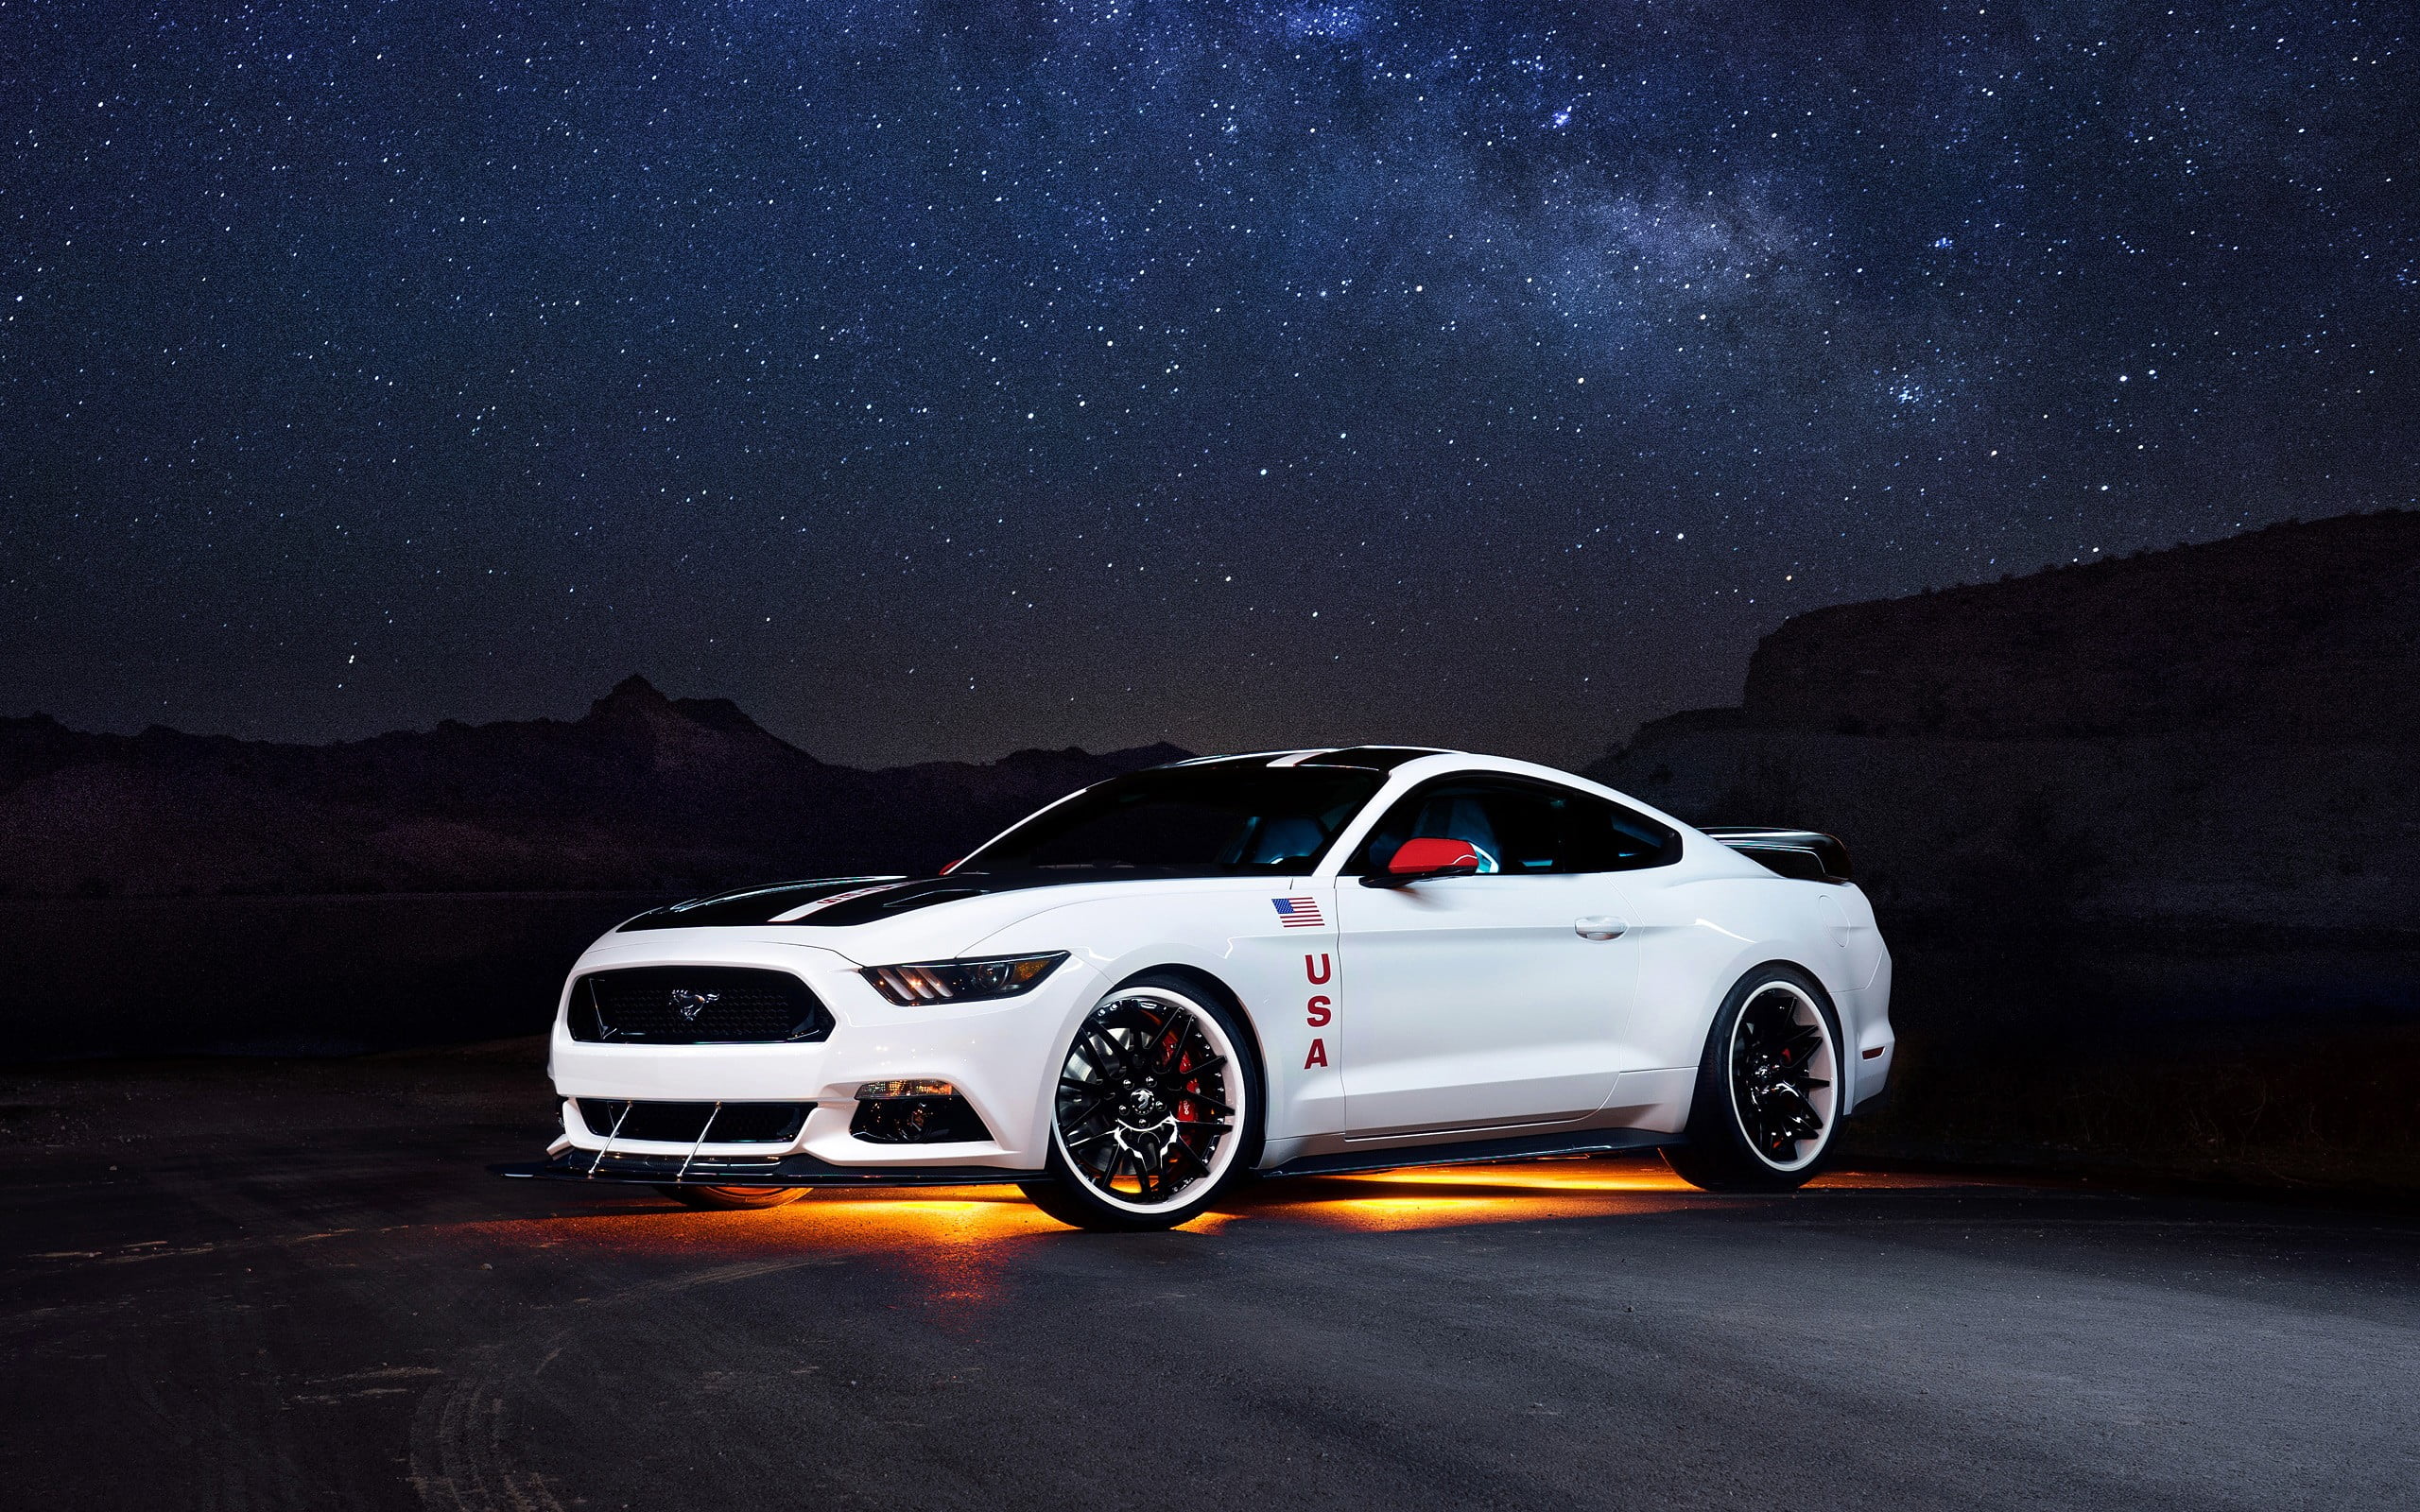 White Ford Mustang 5th Gen Ford Mustang Gt Apollo Edition Car Muscle Cars Hd Wallpaper Wallpaper Flare